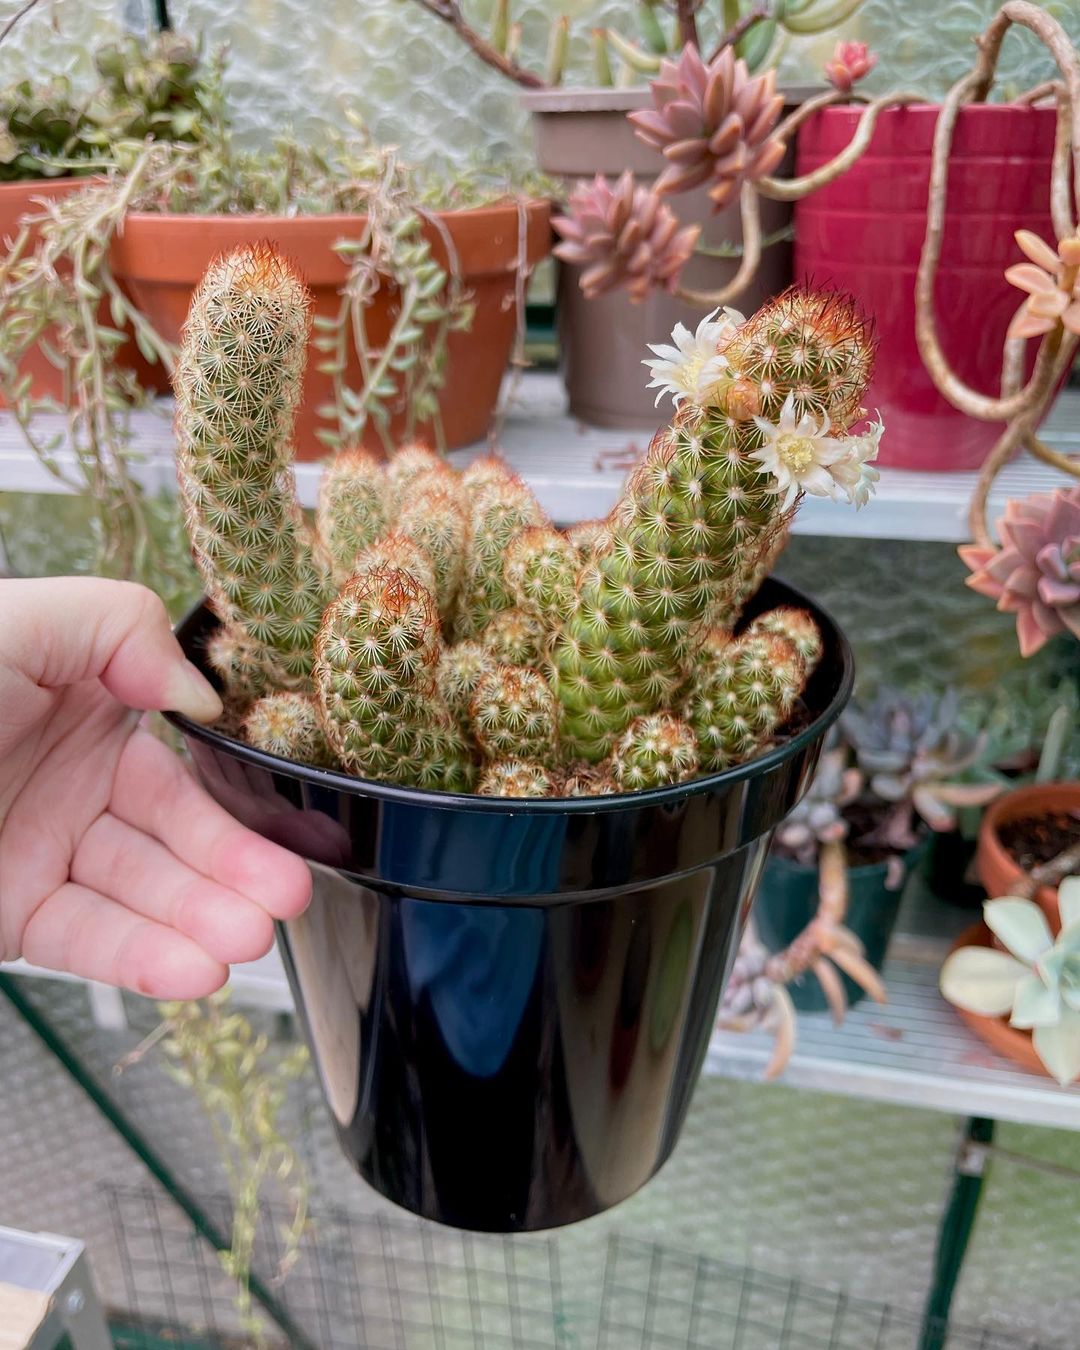  Image of a person holding a black pot with a Lady Finger Cactus.